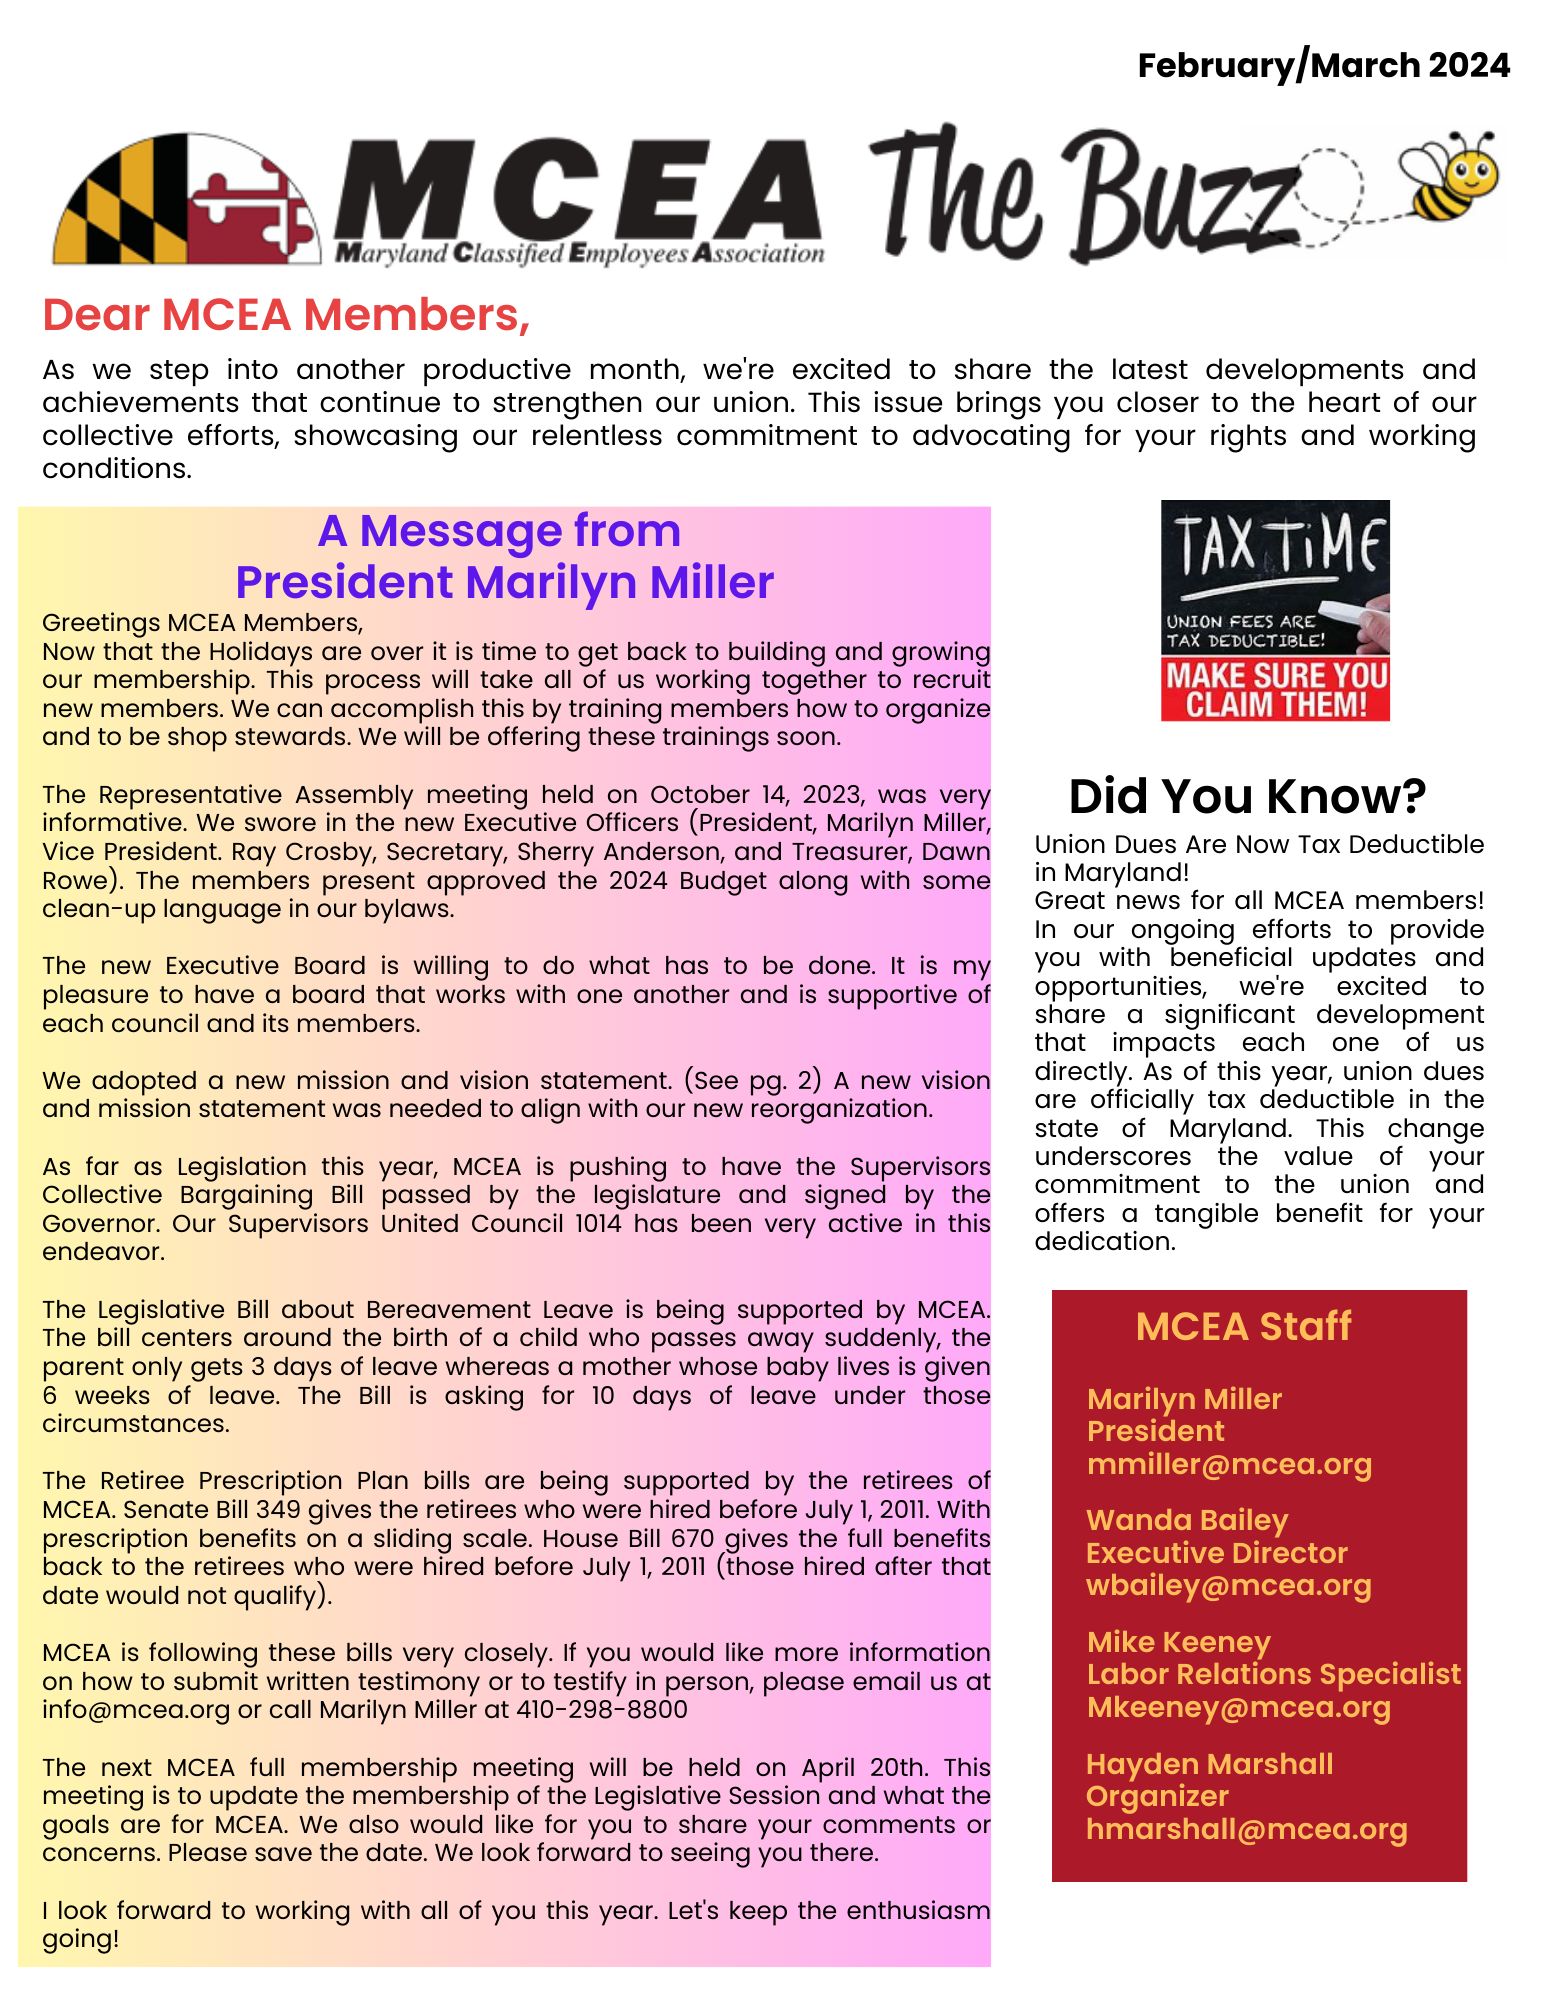 The Buzz Newsletter Page 1